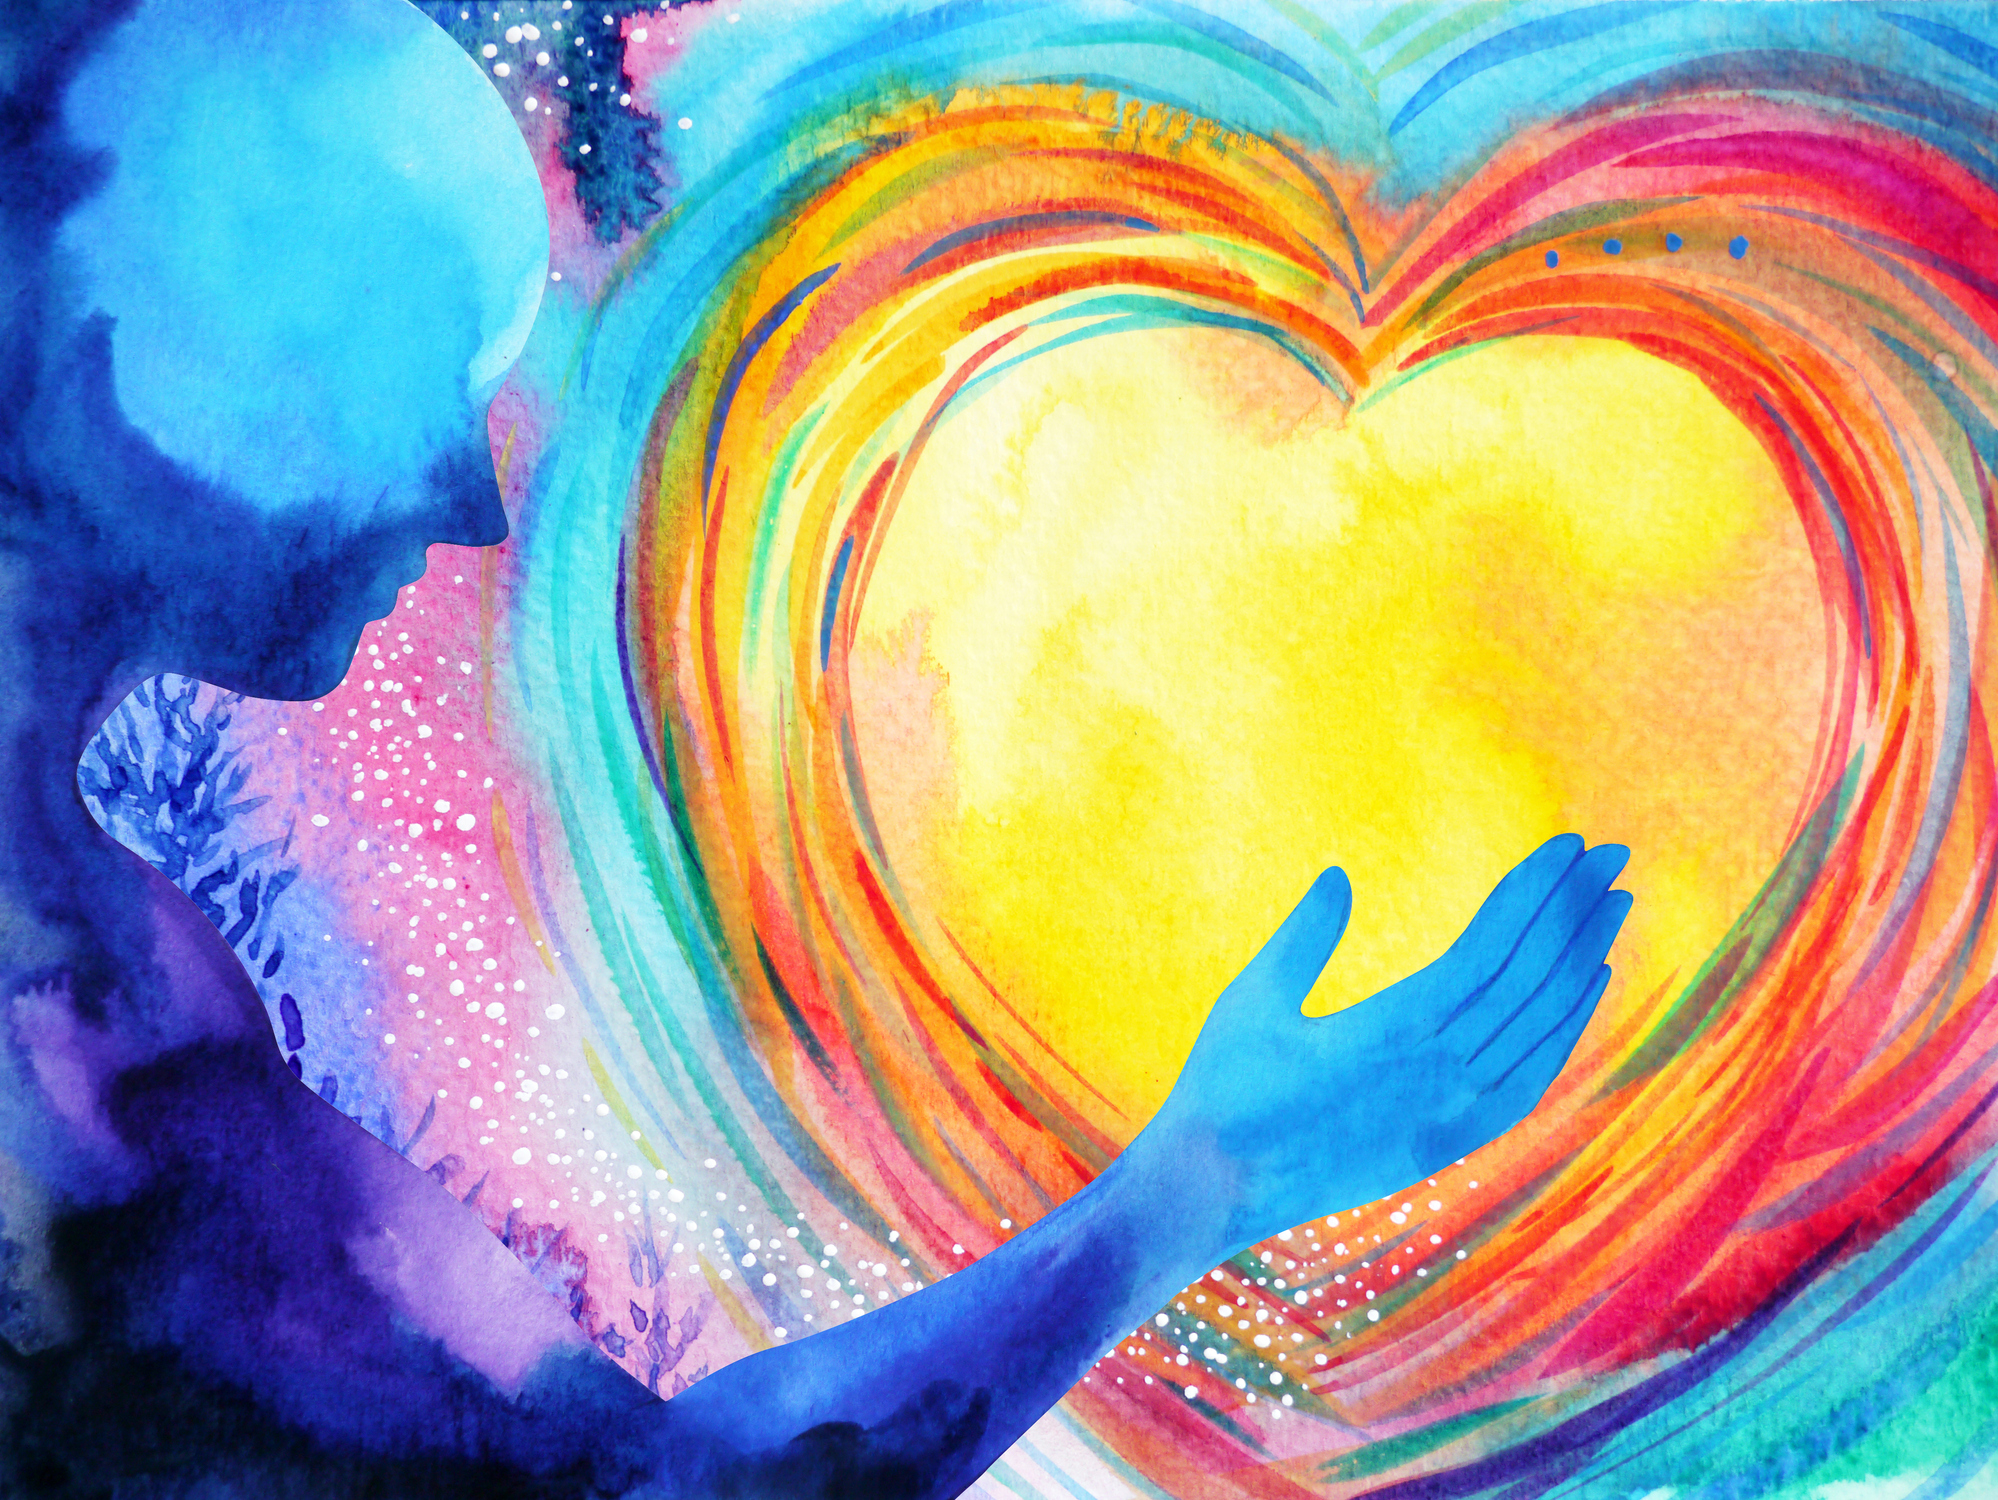 Vibrant illustration of figure holding heart in outstretched hands